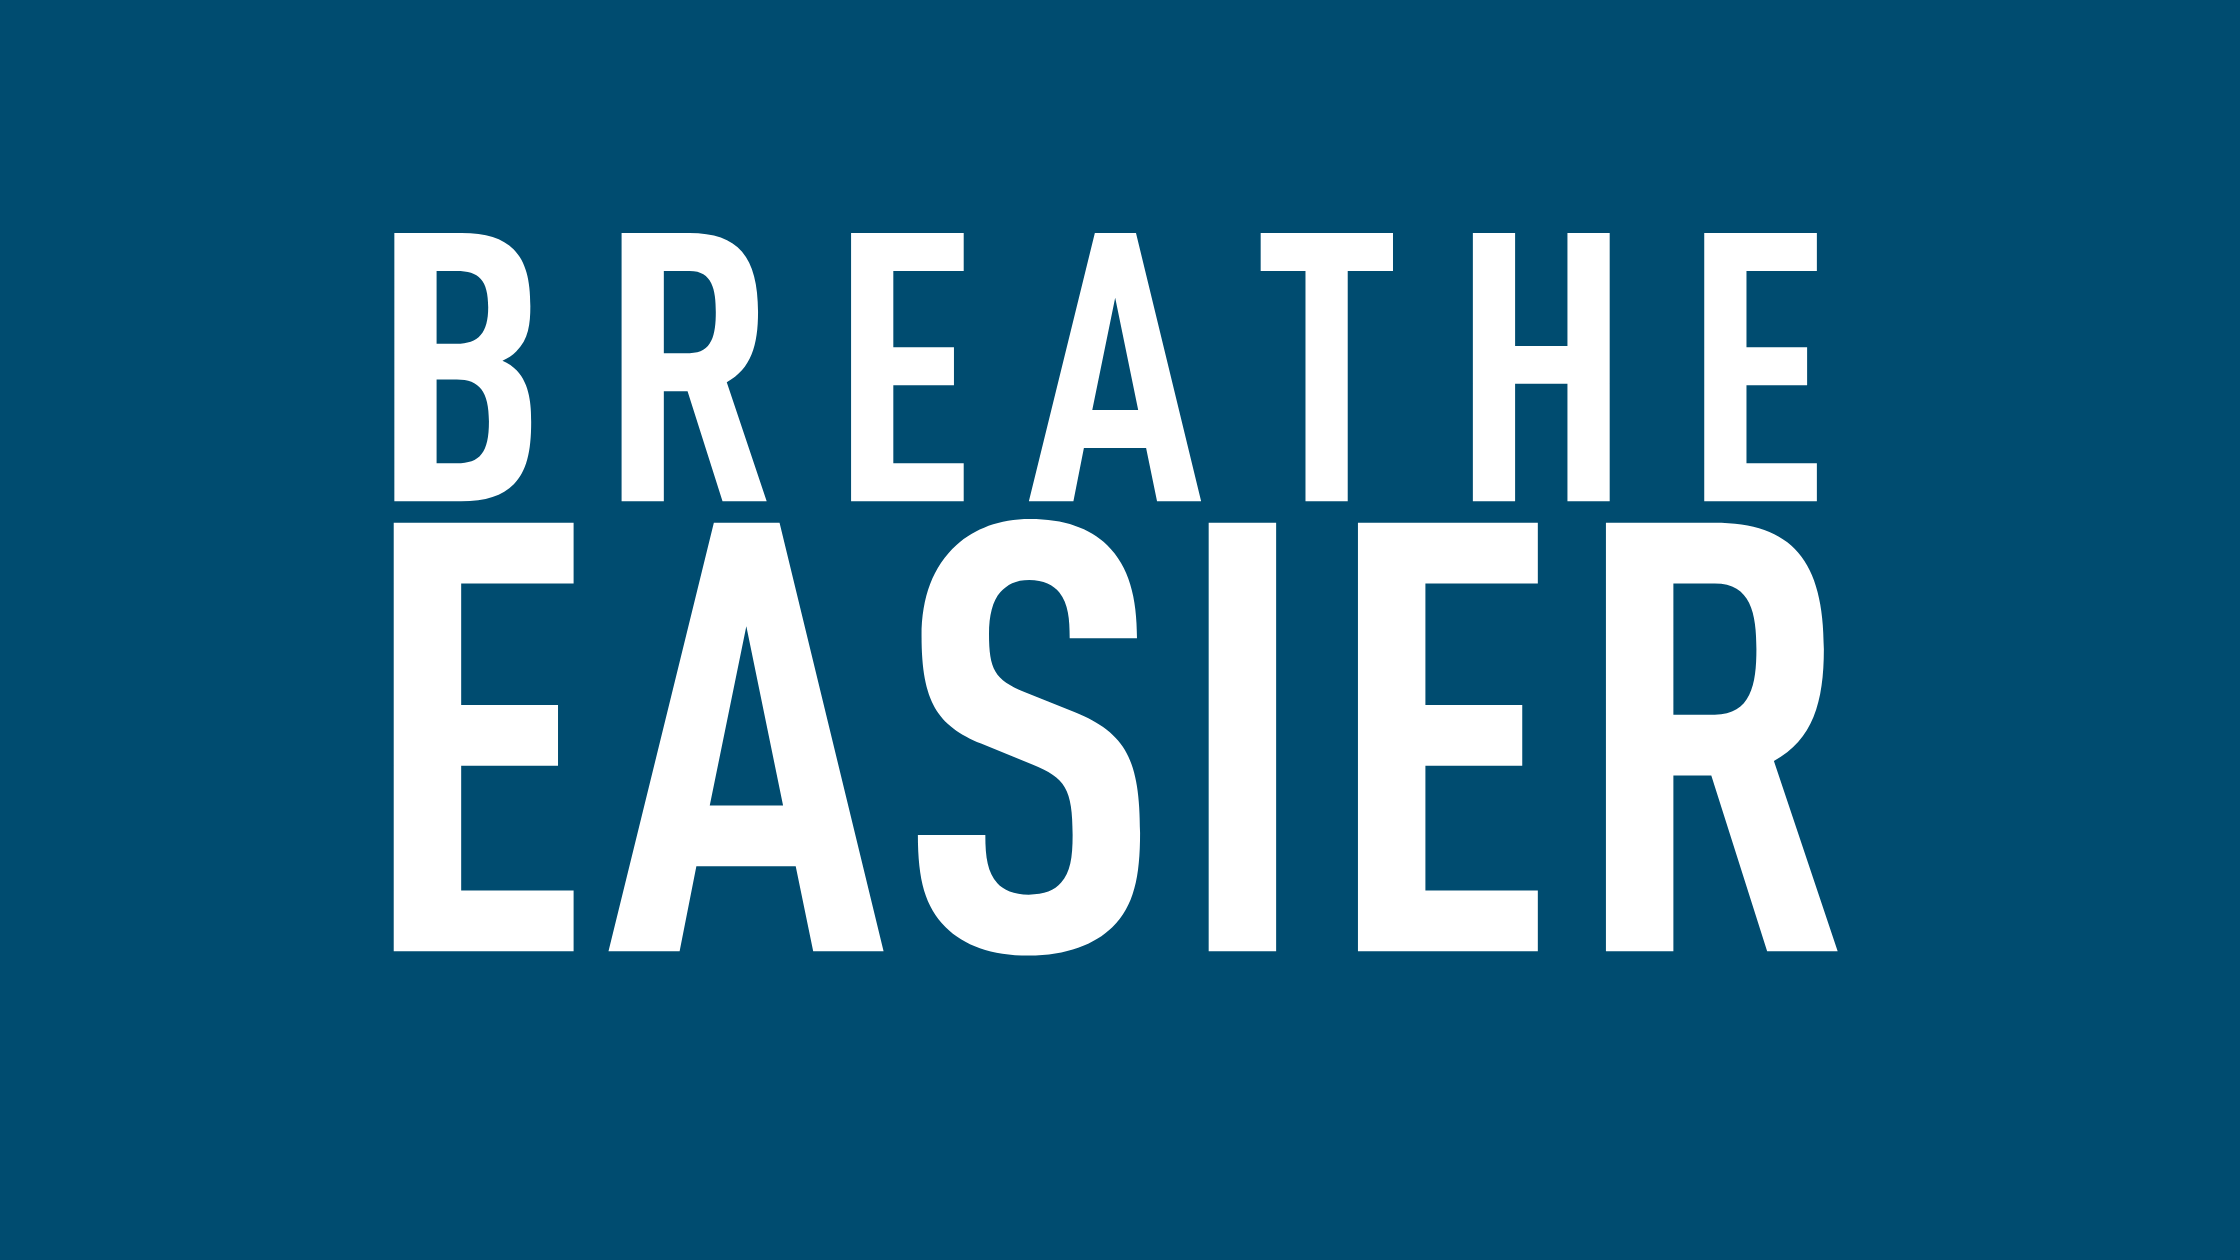 Breathe Easier in large, white, bold text with a dark blue background